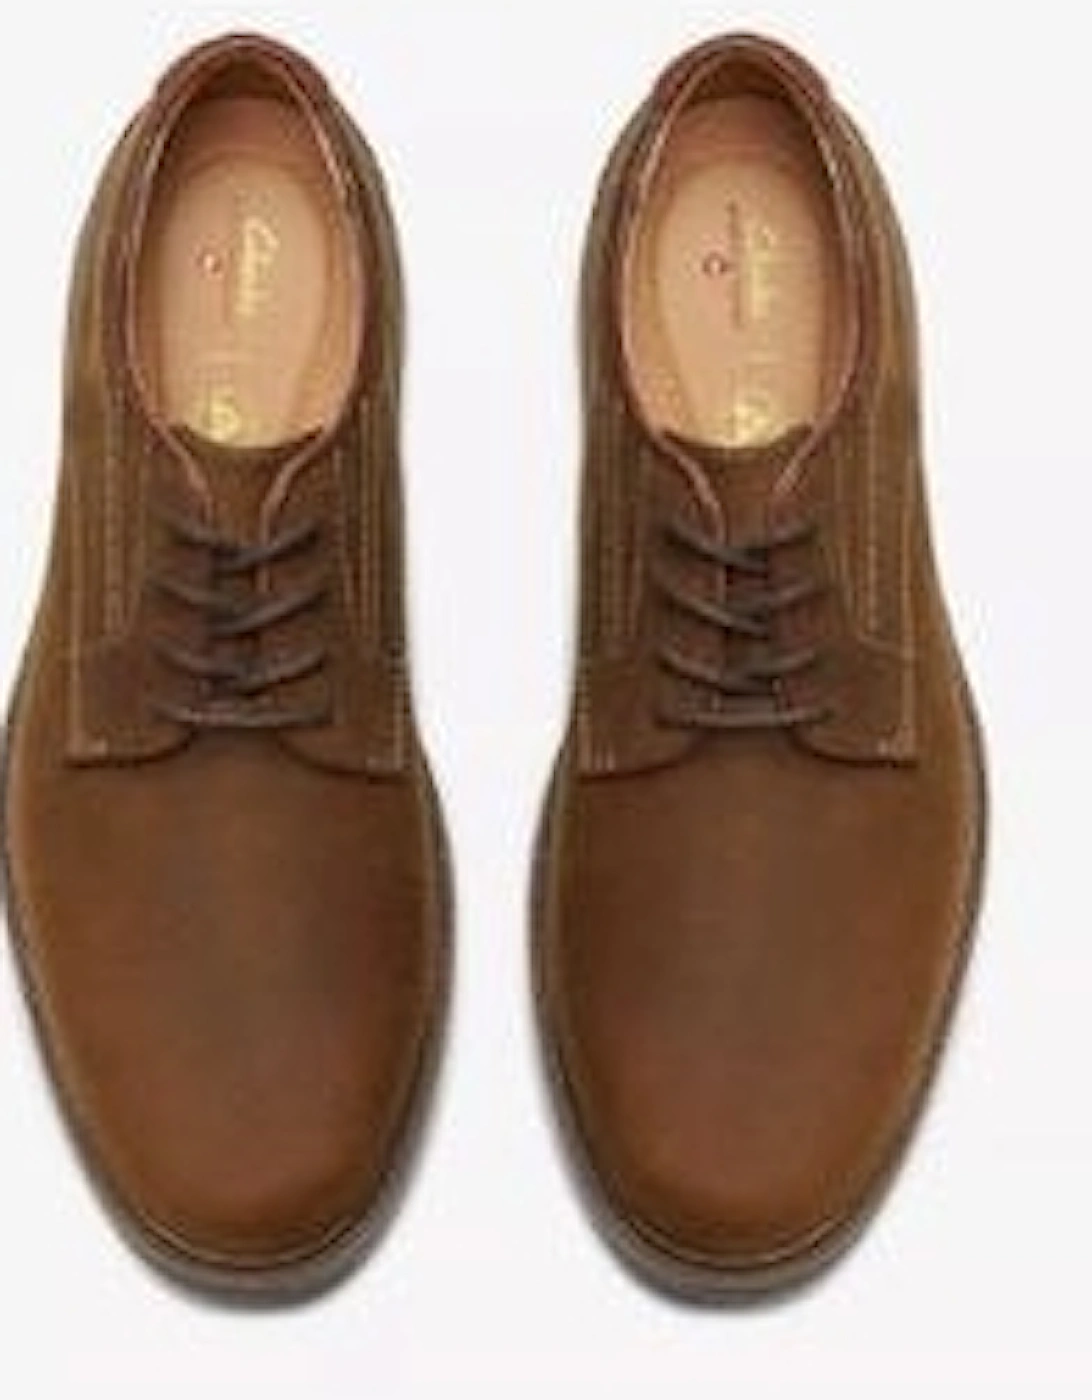 Mens Un Shire Low in Beeswax Leather